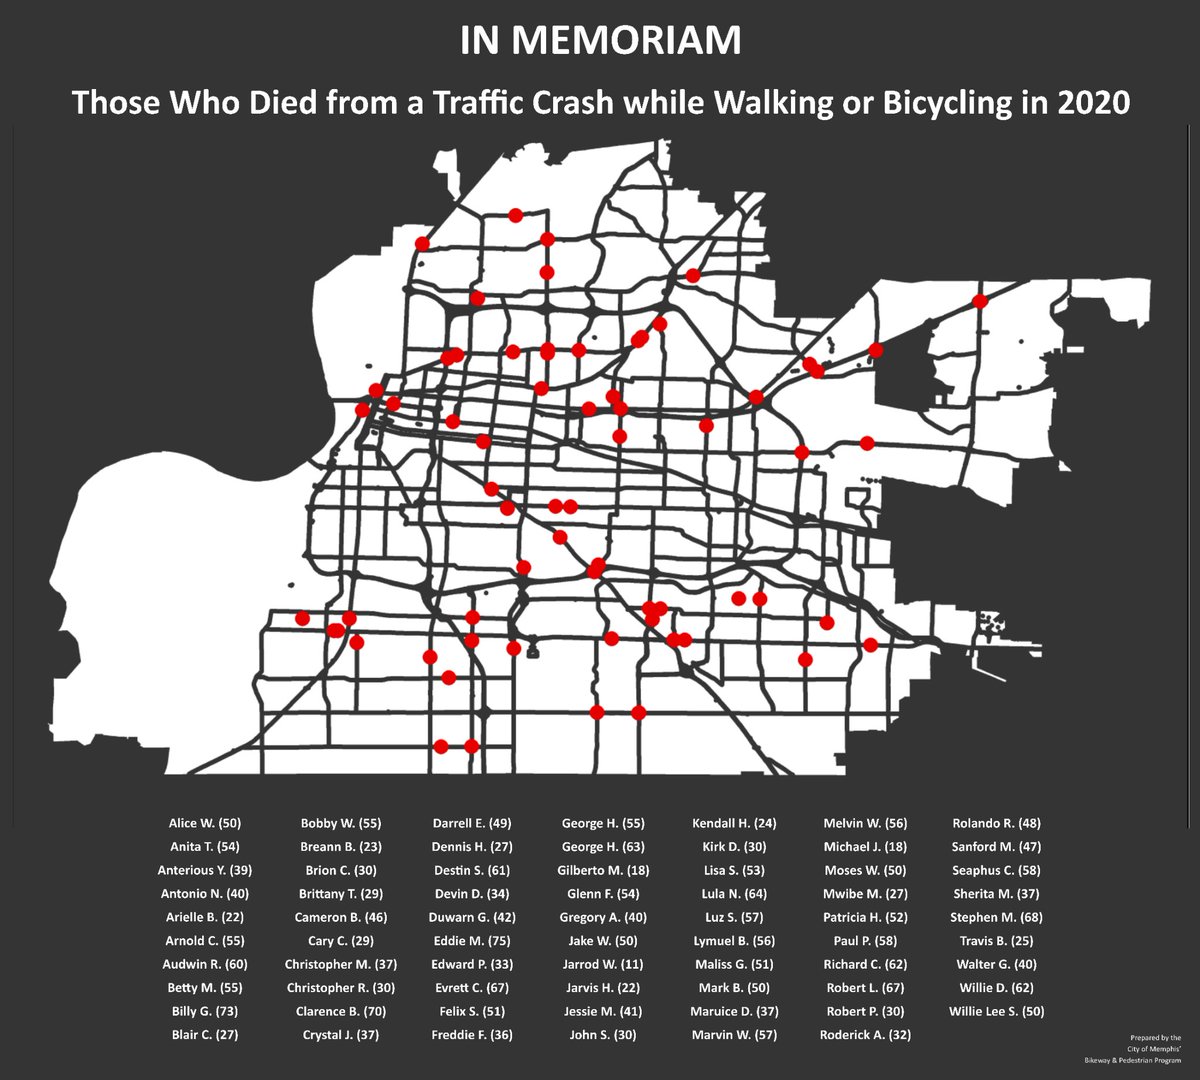 Bike Ped Memphis on X: Memphis traffic crashes took the lives of 64 people  walking and 4 people bicycling in 2020. We offer this map memorial to honor  and reflect on the